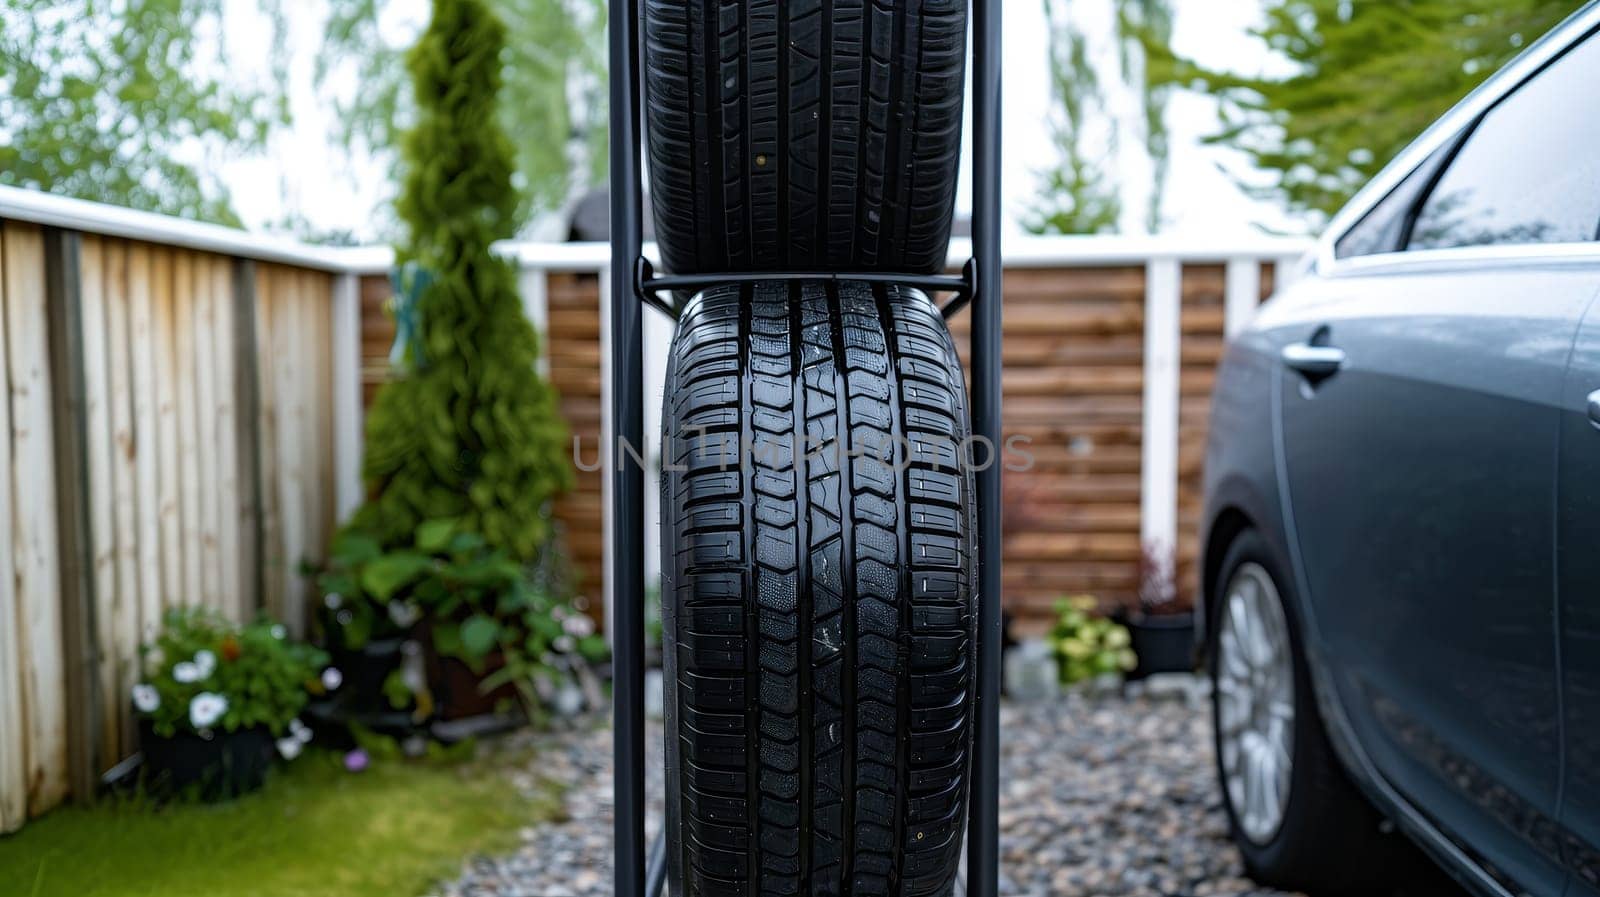 Car tires are vertically stacked in a residential outdoor setting, providing a contrast between the automotive elements and the greenery of a home garden. The tires are showcased in daylight. by sfinks